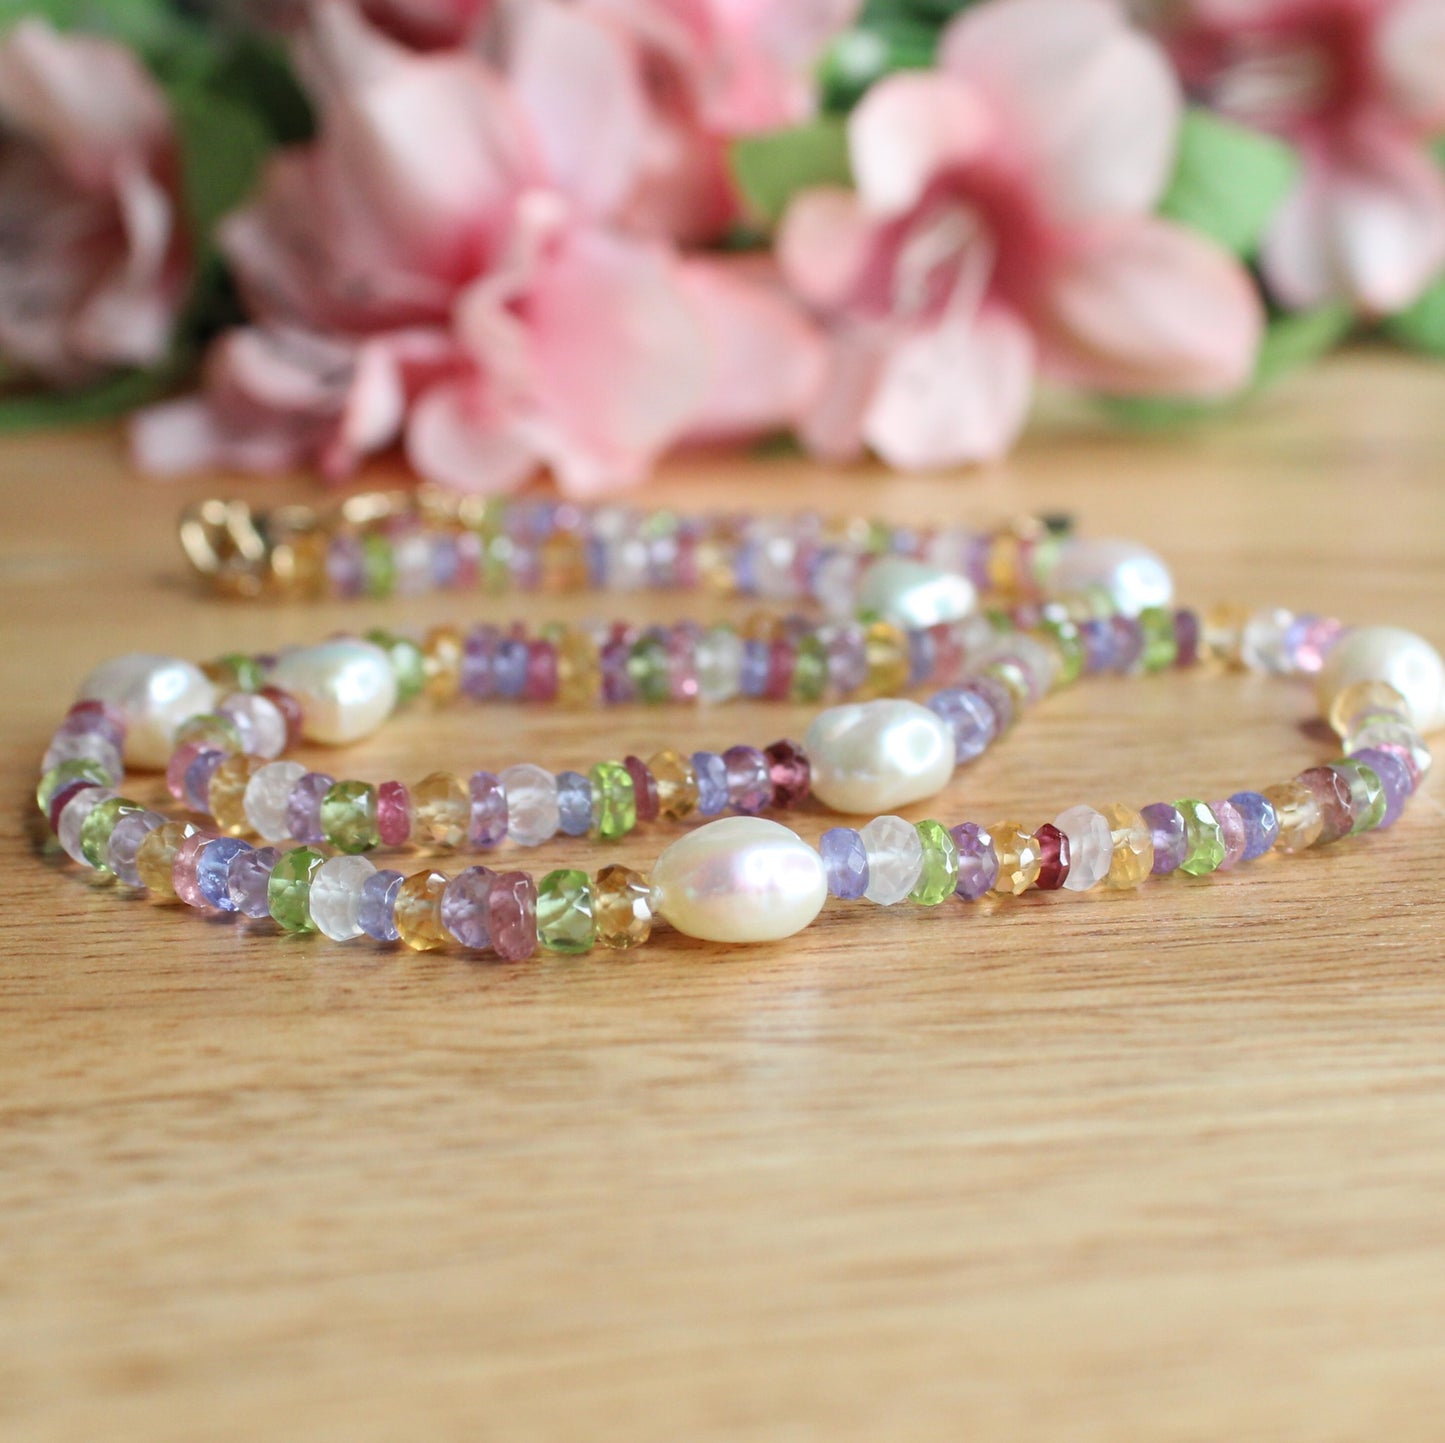 Mixed Gemstone Necklace - Field Flowers with Pearls